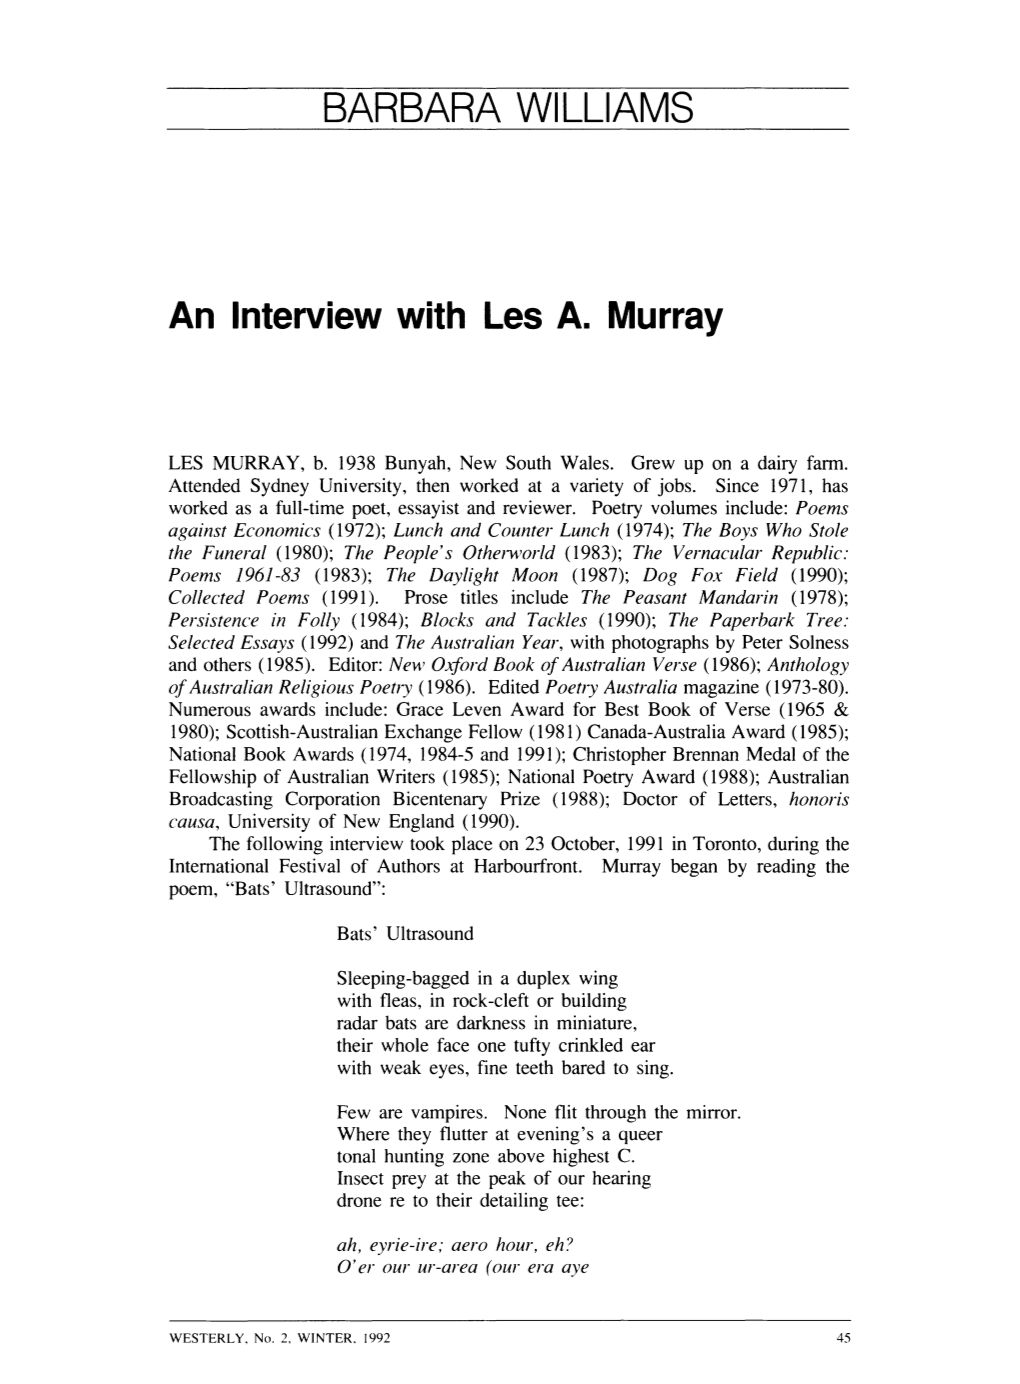 Barbara Williams' Interview with Les Murray